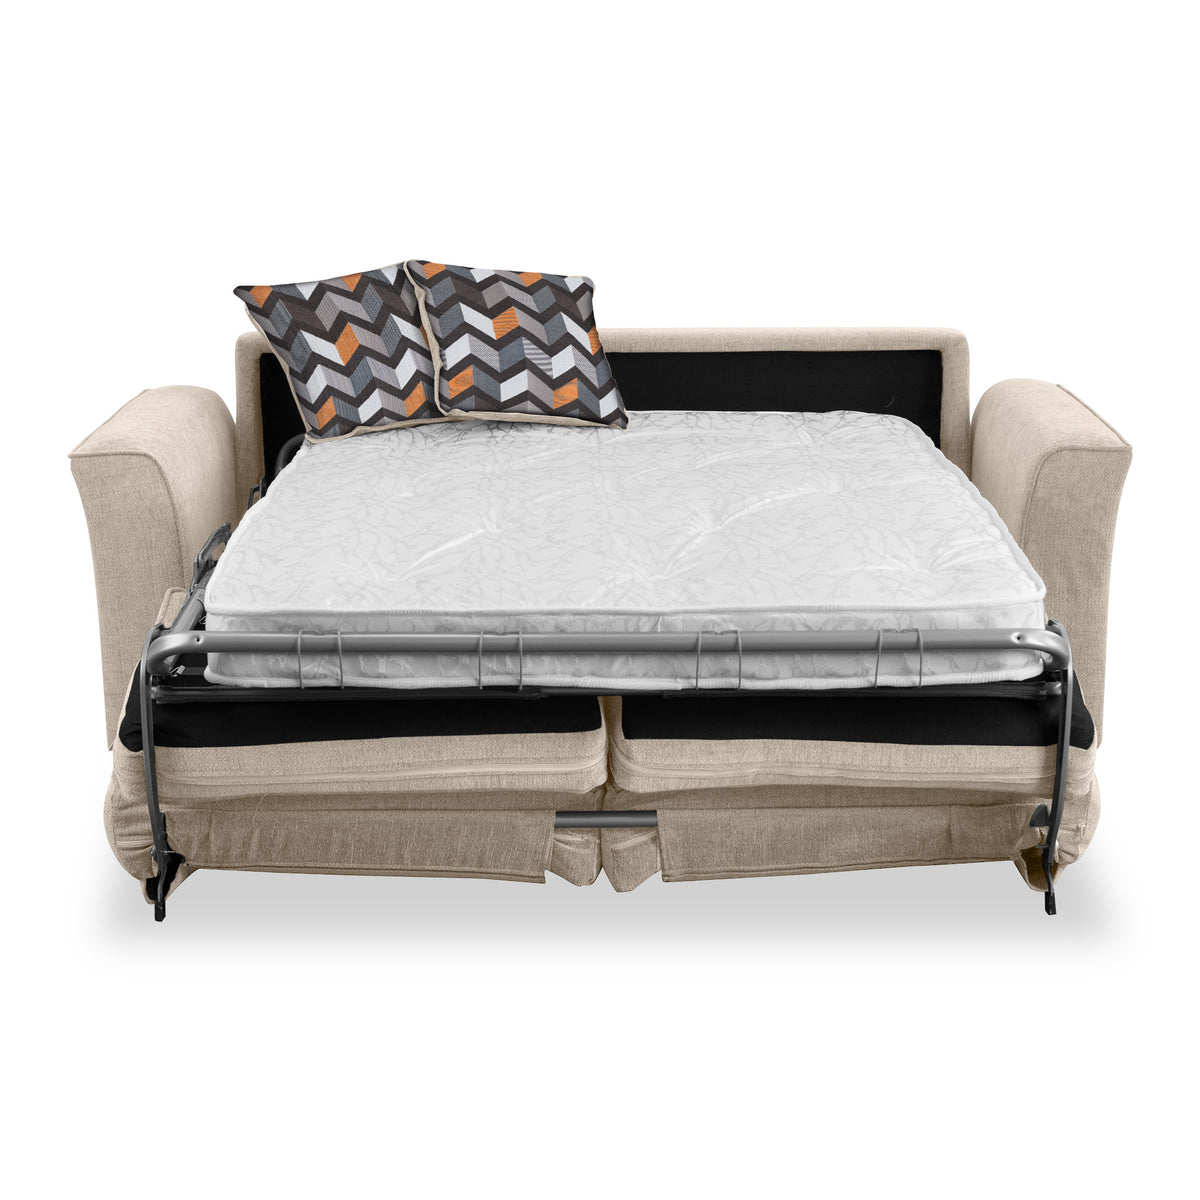 Abbott 2 Seater Sofabed in Oatmeal with Morelisa Charcoal Cushions by Roseland Furniture